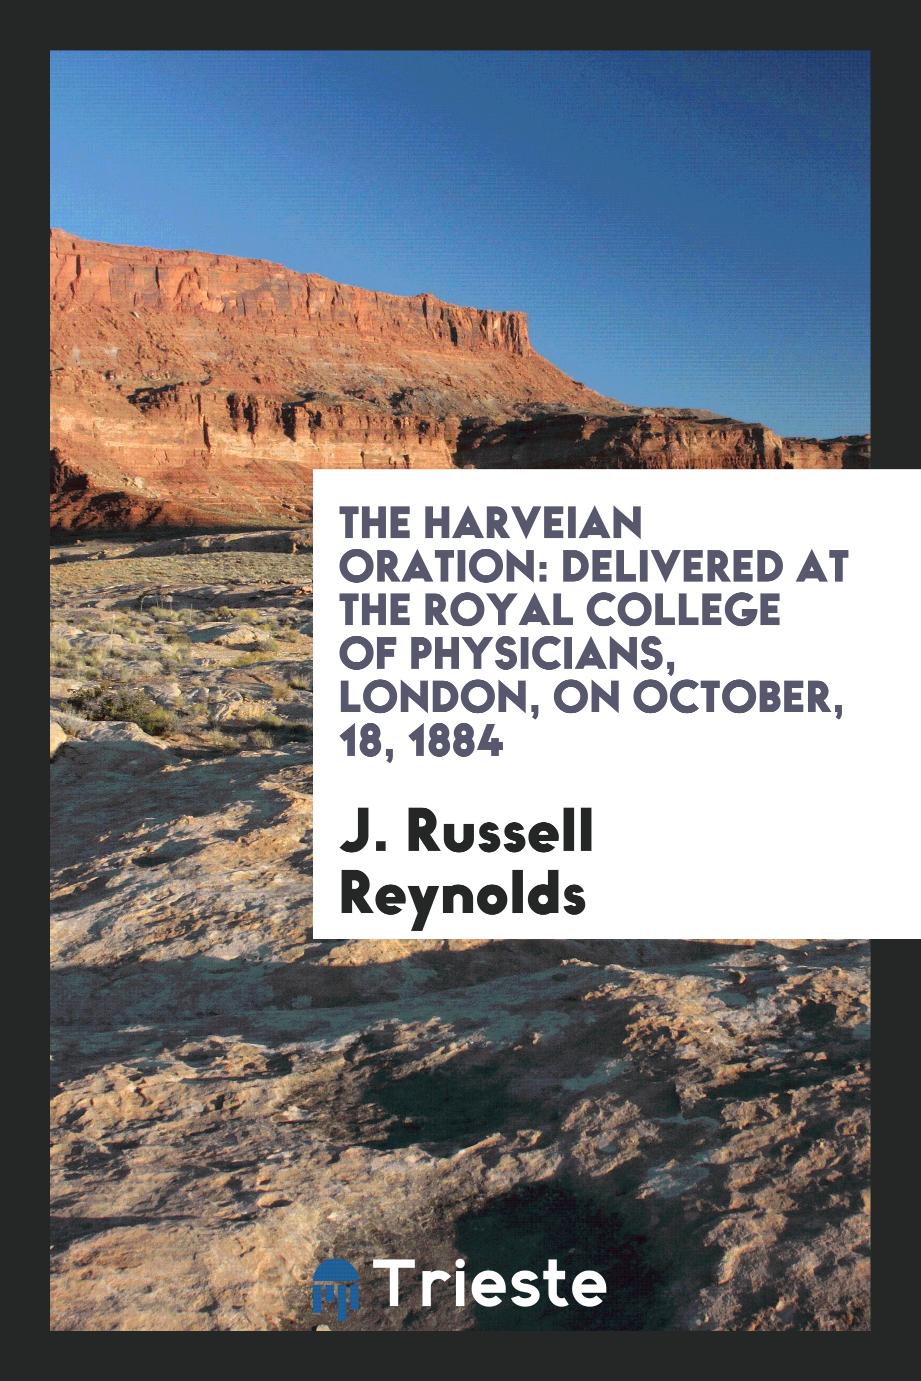 The Harveian Oration: Delivered at the Royal College of Physicians, London, on October, 18, 1884